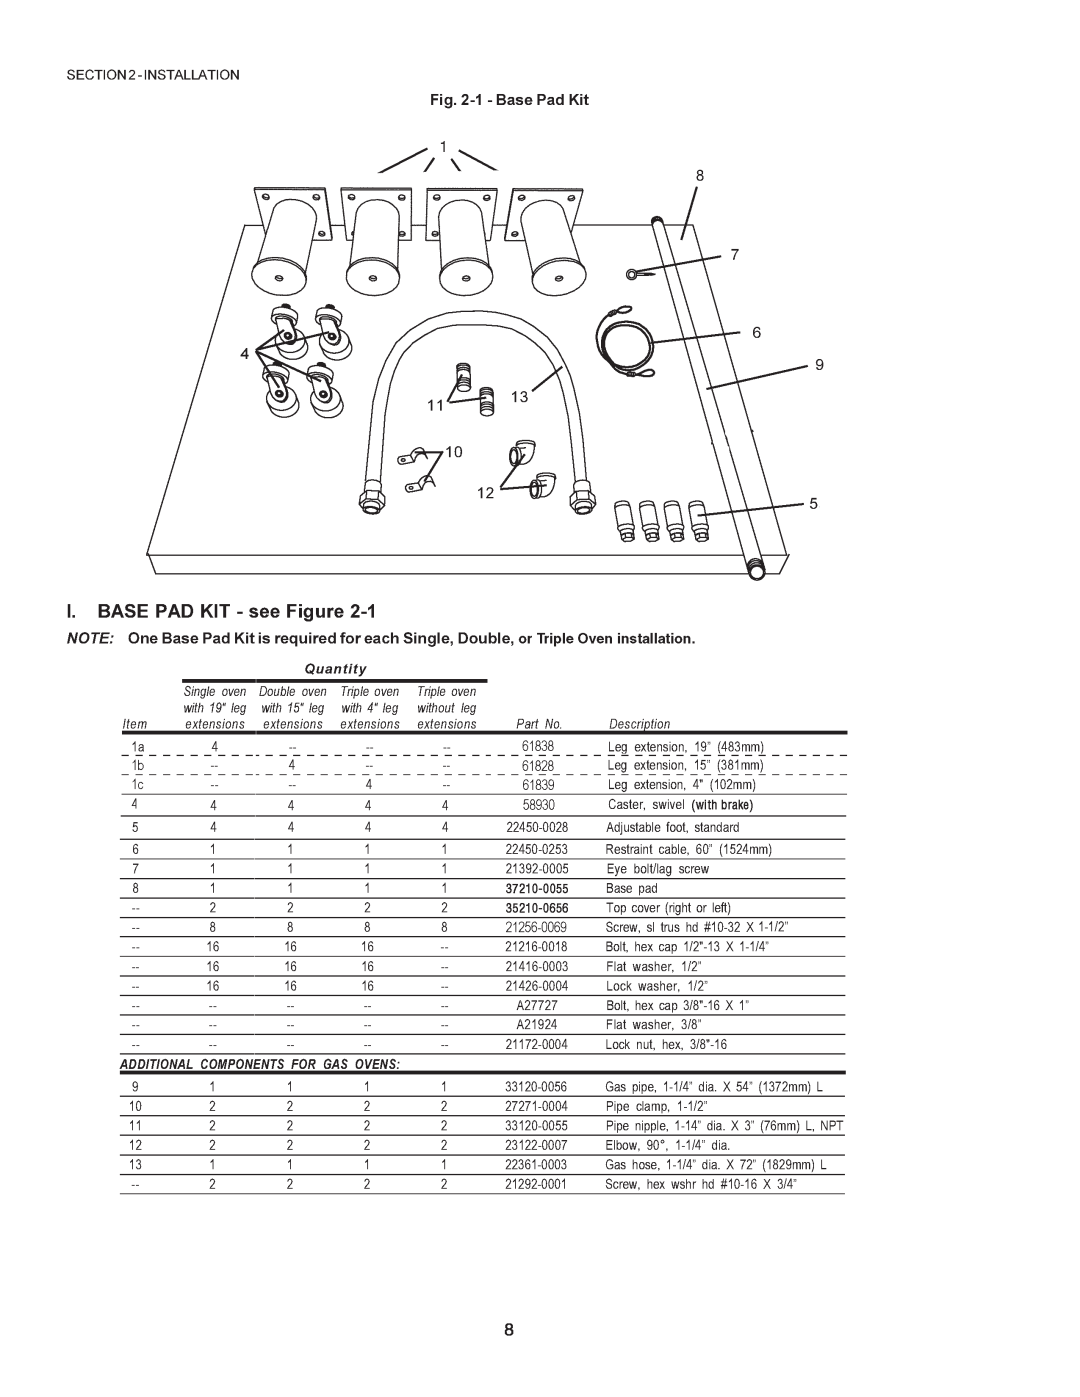 Middleby Cooking Systems Group PS770 installation manual 